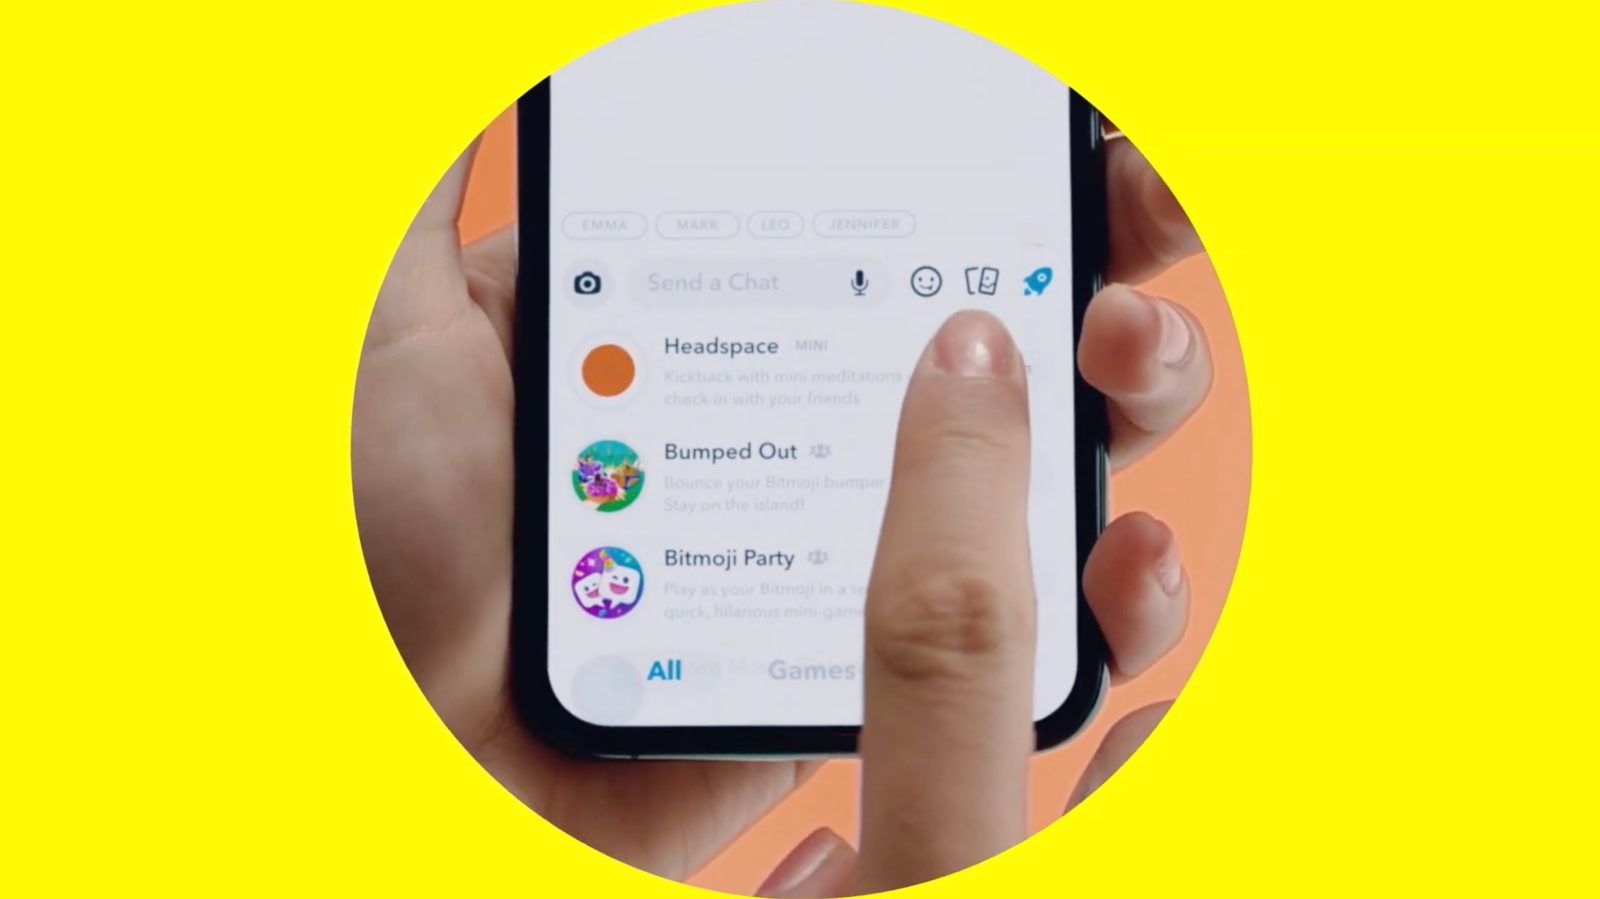 Snapchat "Minis" third-party apps much more